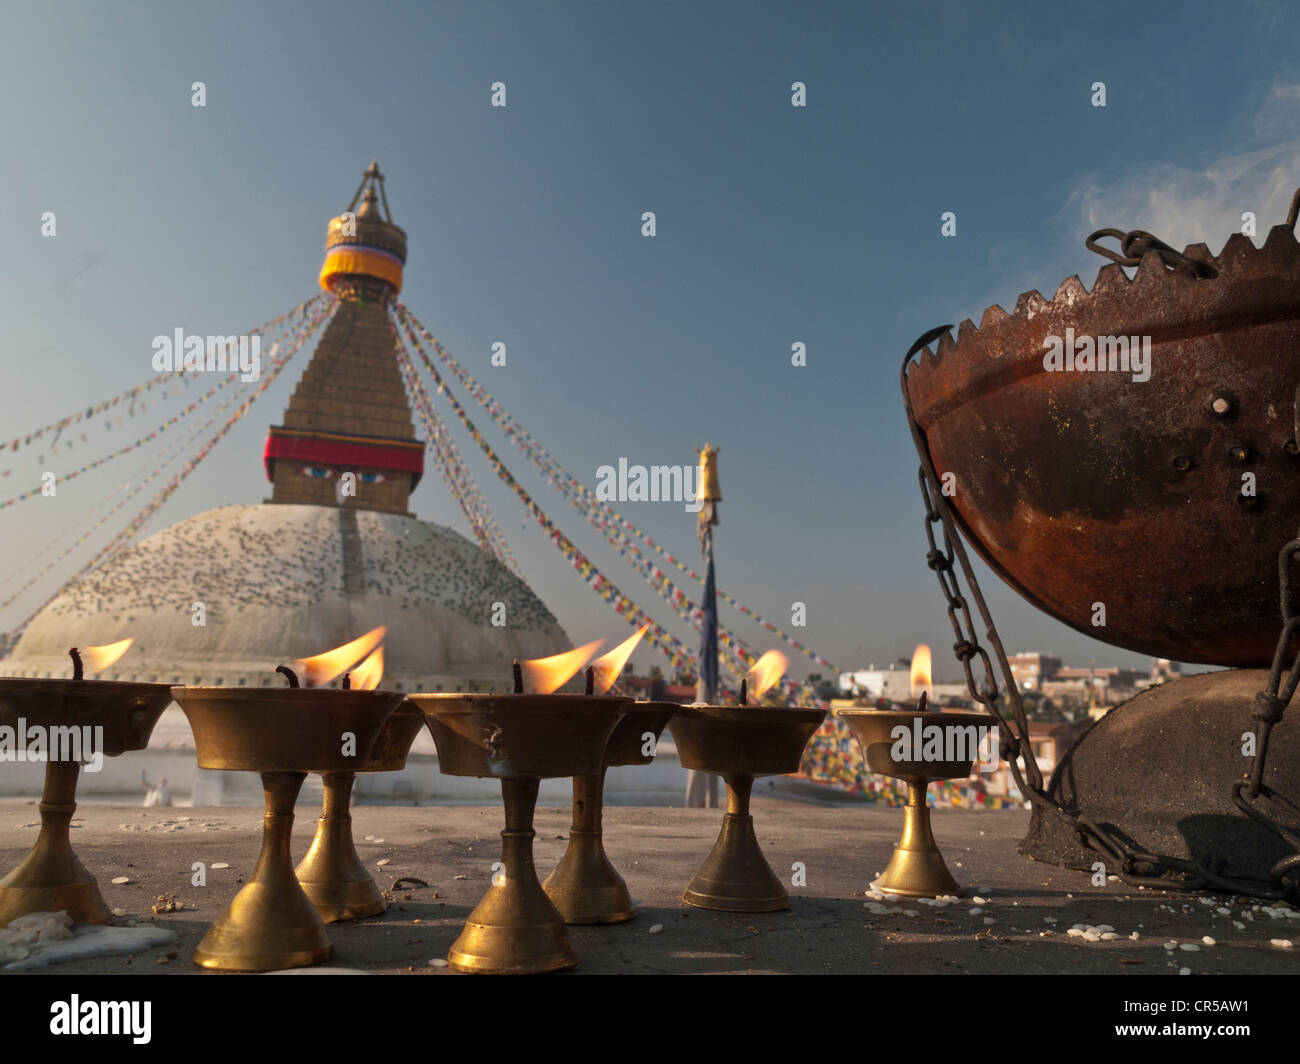 Requisites for religious ceremonies in front of Boudnath stupa, Boudnath, Kathmandu, Nepal, South Asia Stock Photo